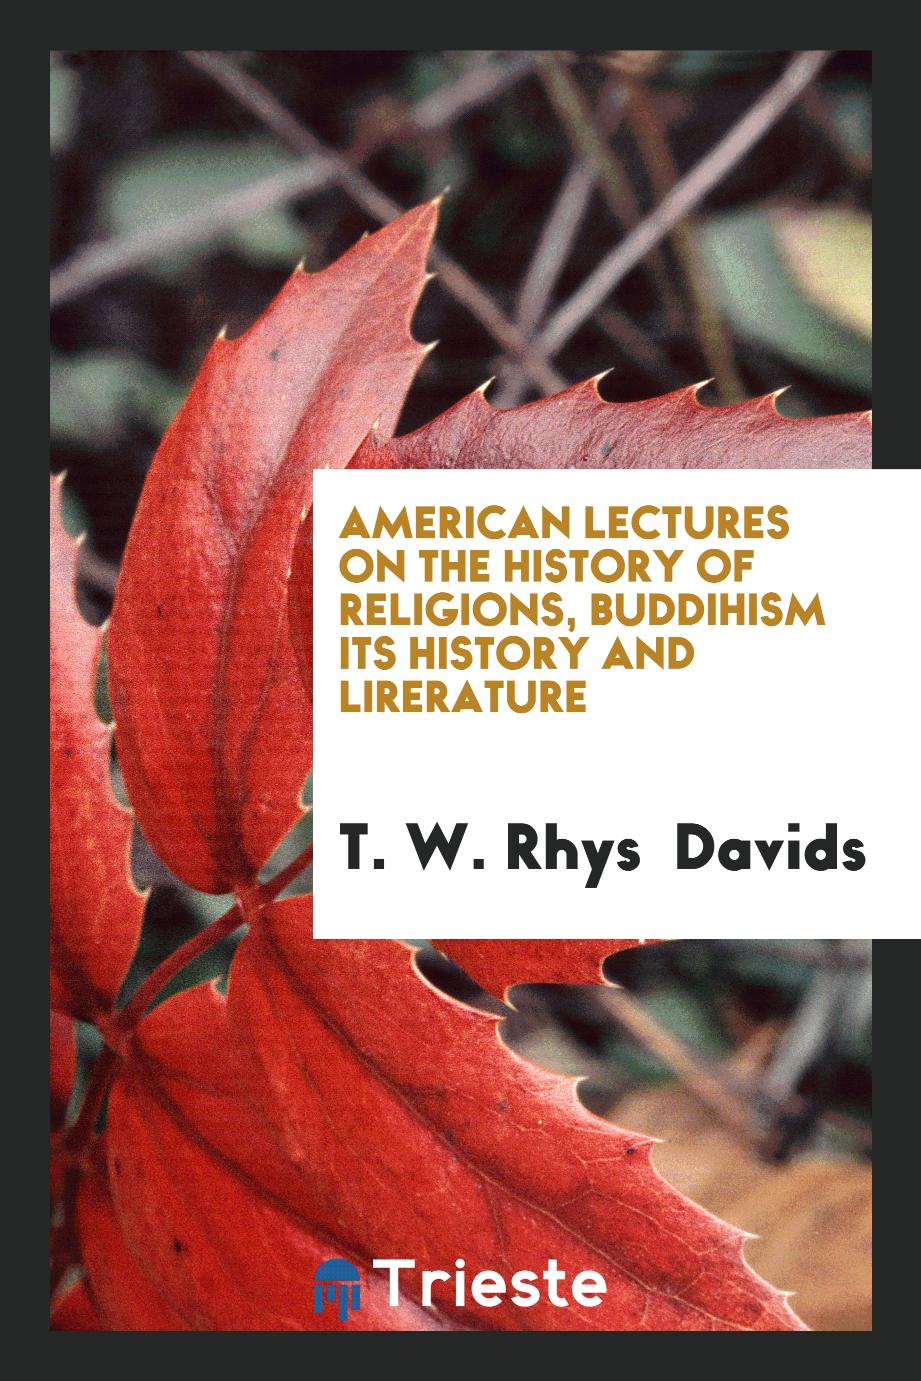 American lectures on the history of religions, buddihism its history and lirerature